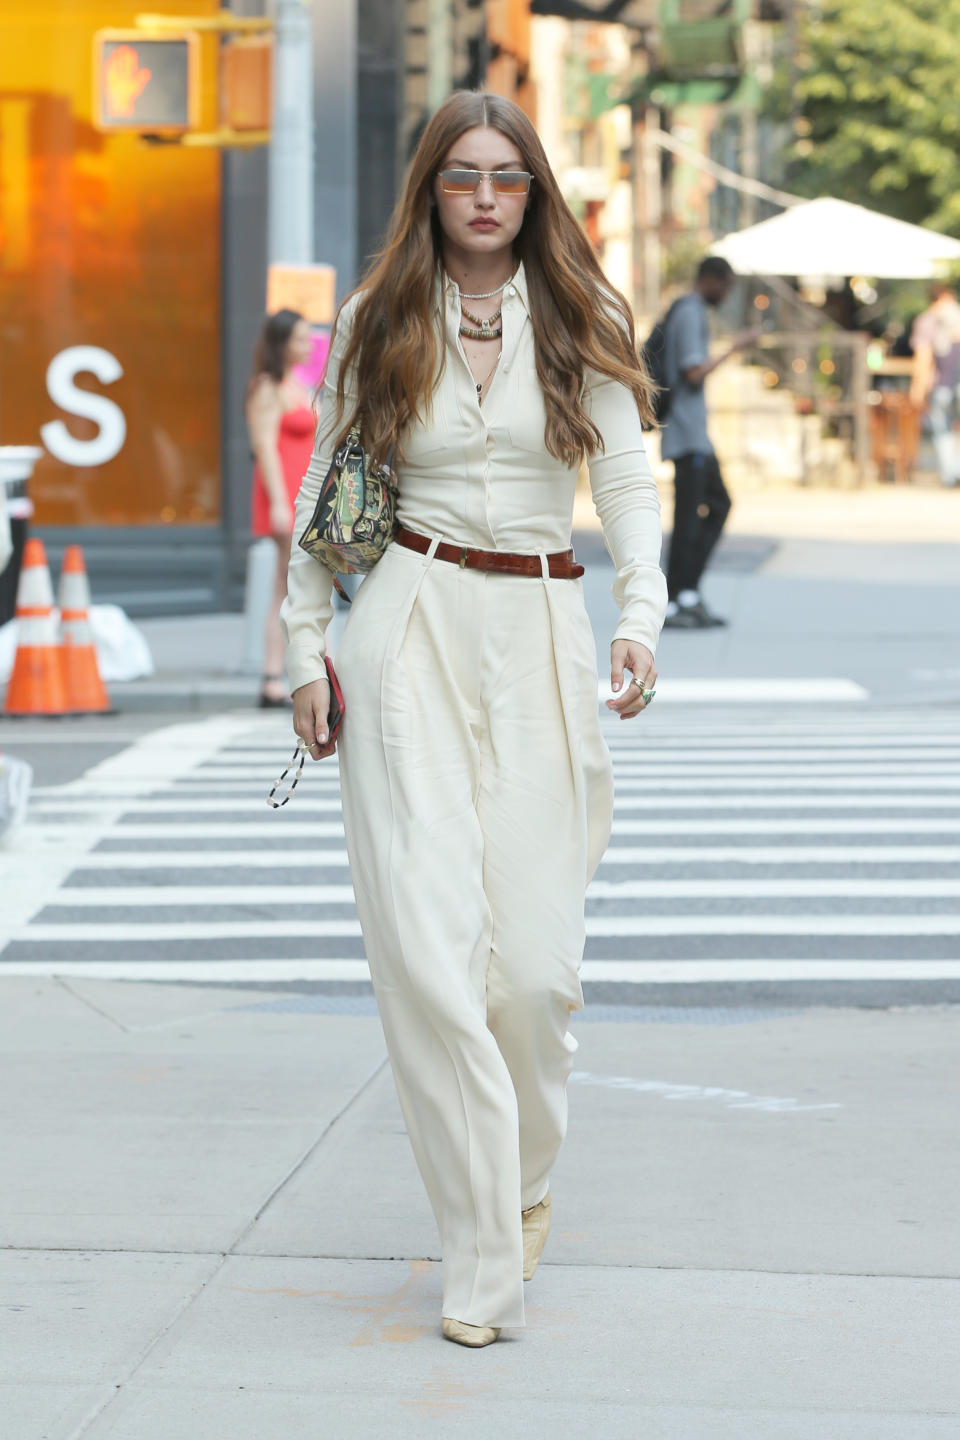 sang Vedholdende Skjult Gigi Hadid Has Boho '70s Vibes in Wide-Leg Pants & Beaded Necklaces With  Sculpted Heels